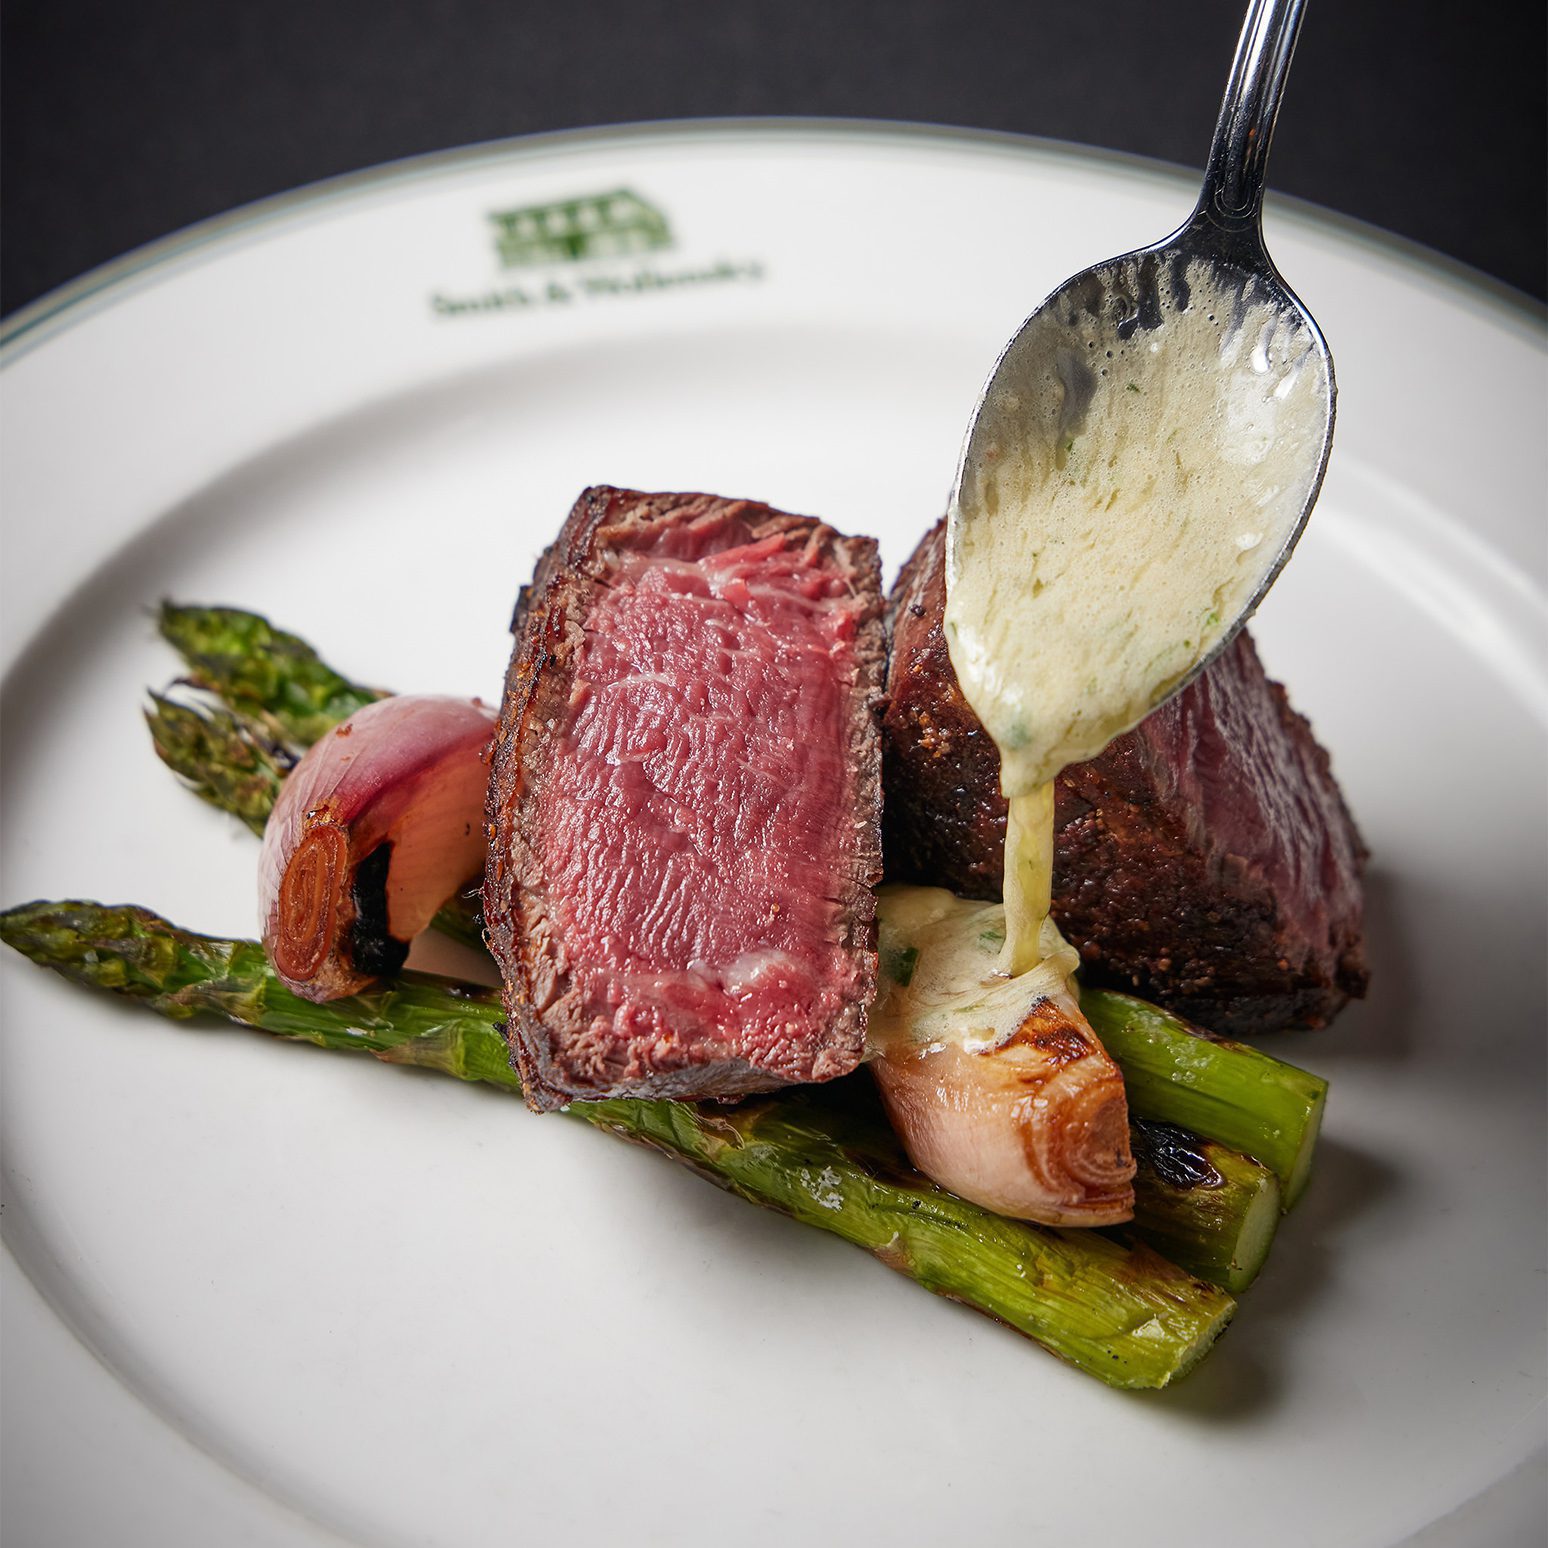 Steak dish with asparagus and onion